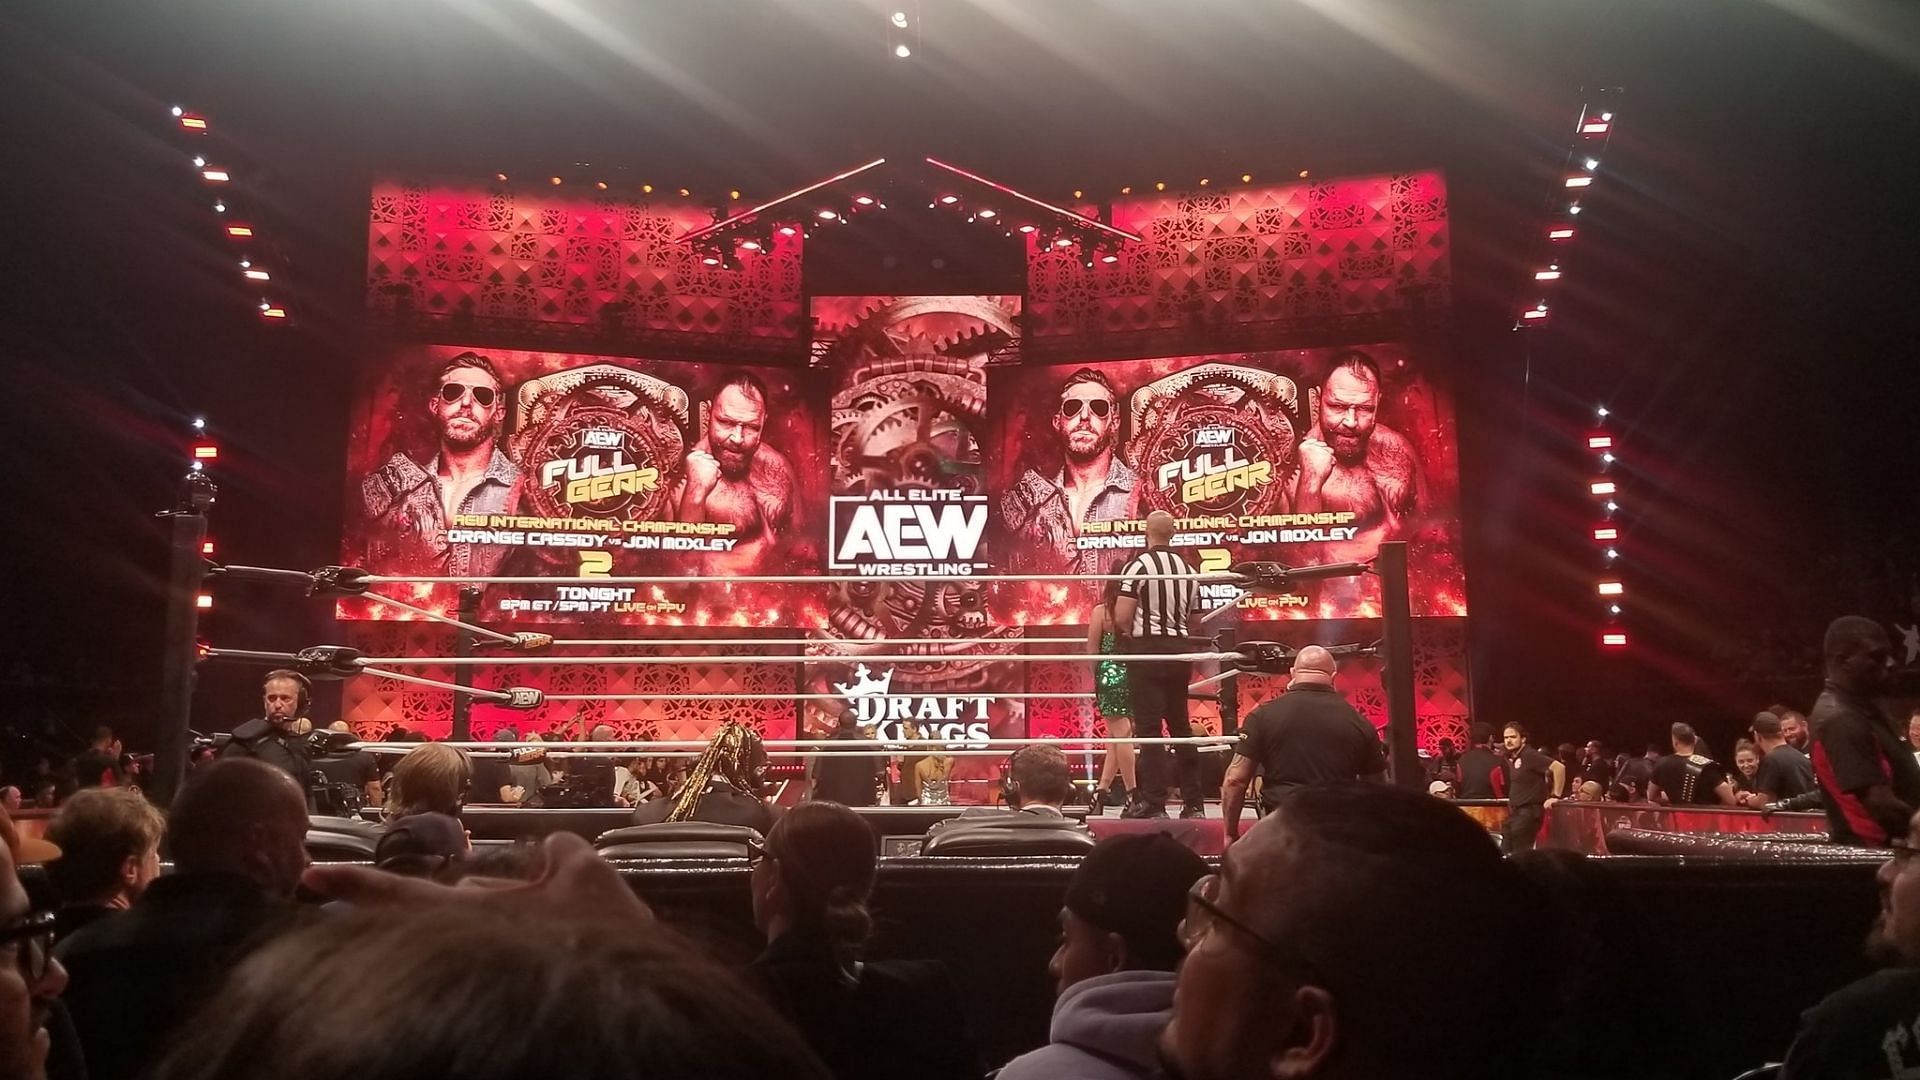 AEW Full Gear took place this weekend.